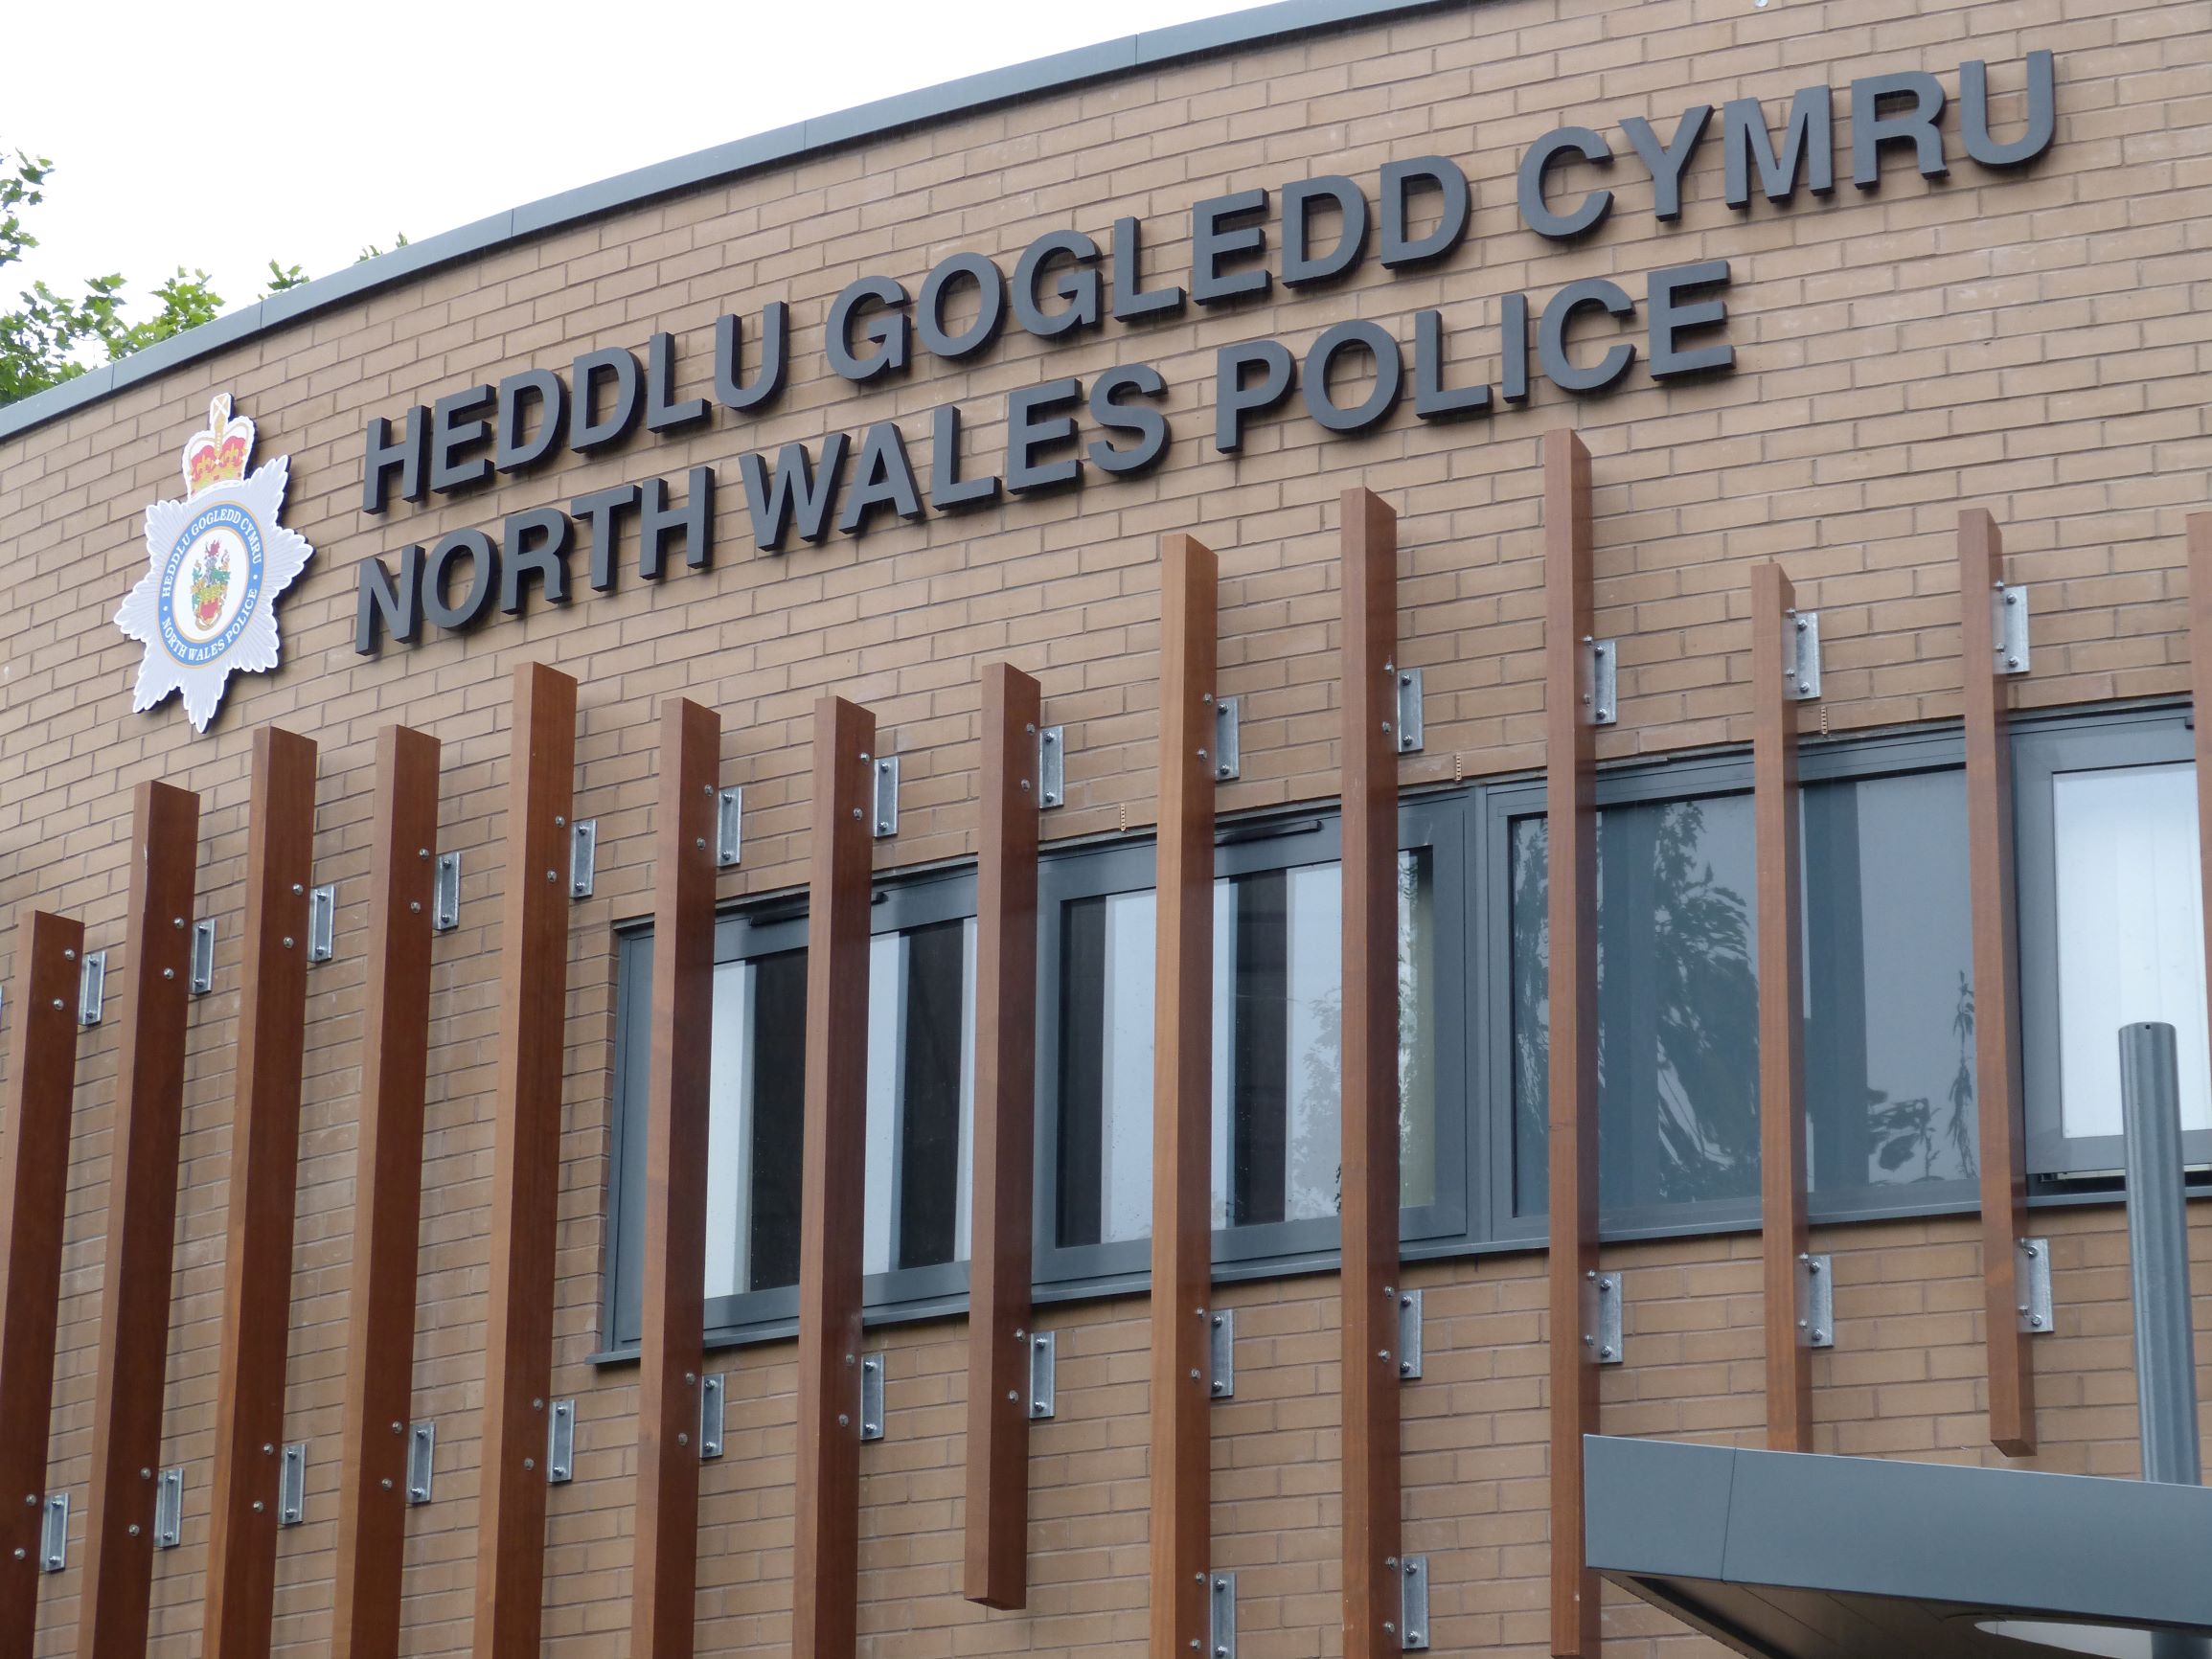 Have your say on funding for policing in North Wales